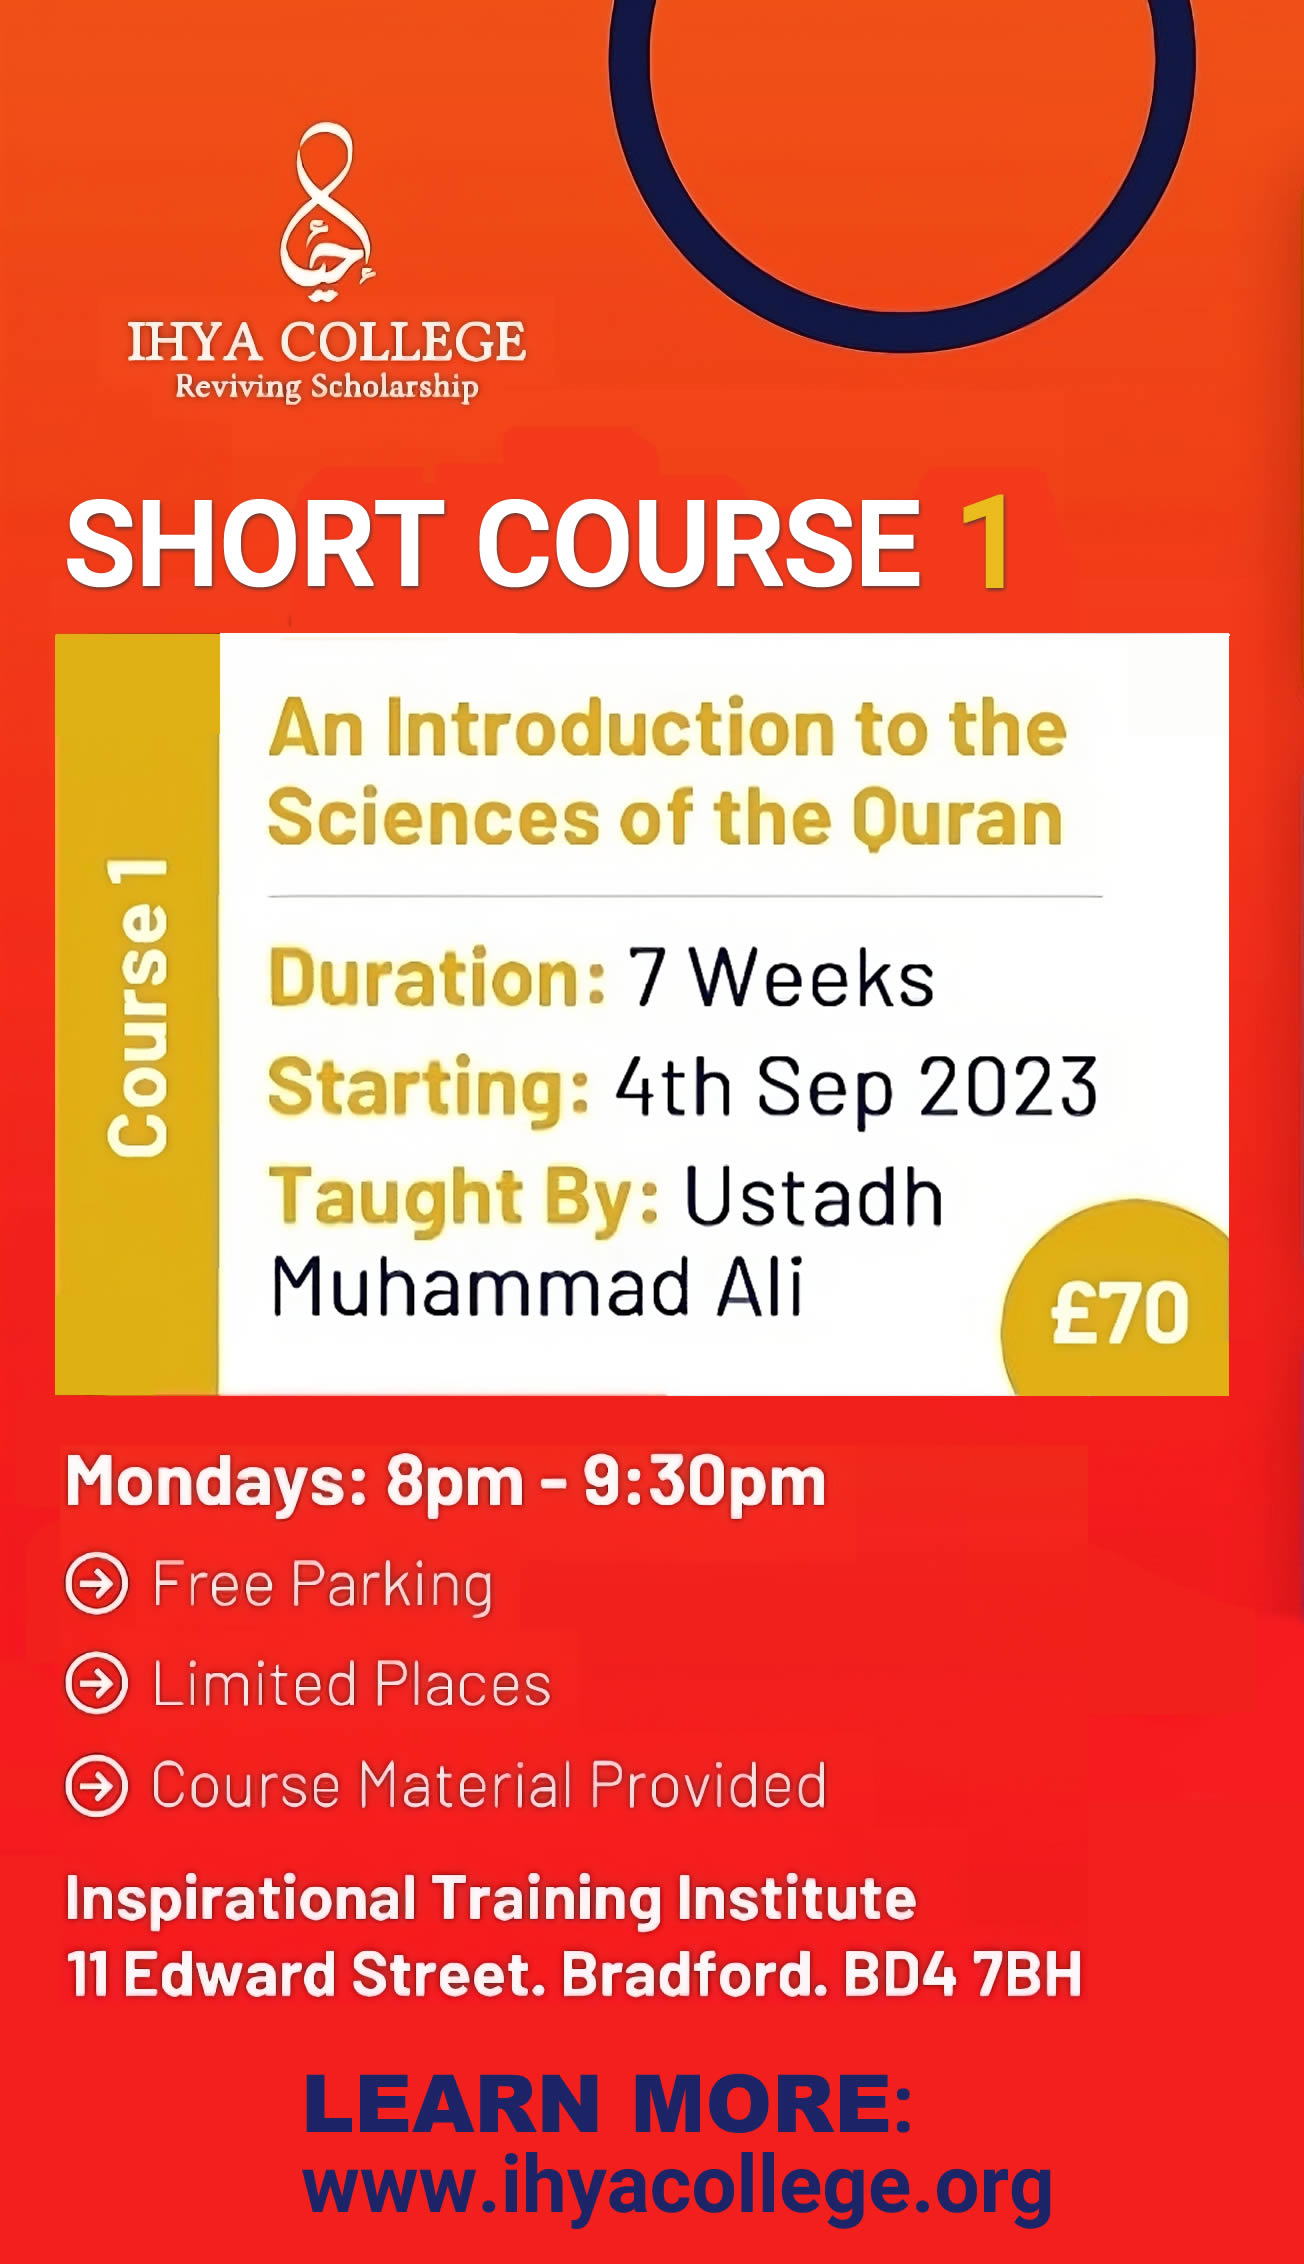 Introduction to the Science of the Quran - Ihya College short course